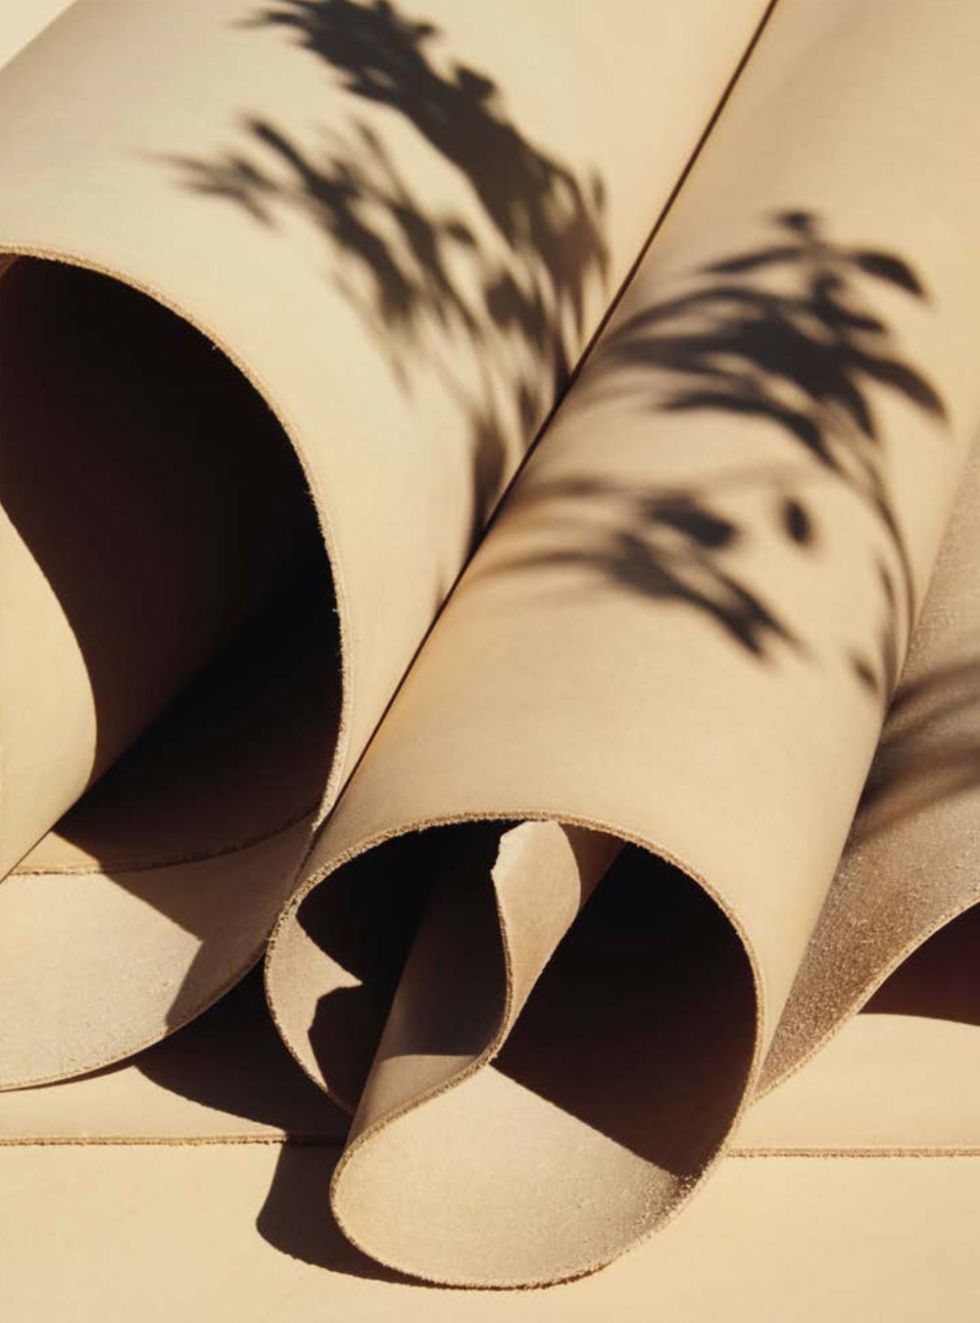 Tints and shades, Beige, Tan, Paper product, Material property, Design, Paper, Still life photography, Cylinder, Natural material, 